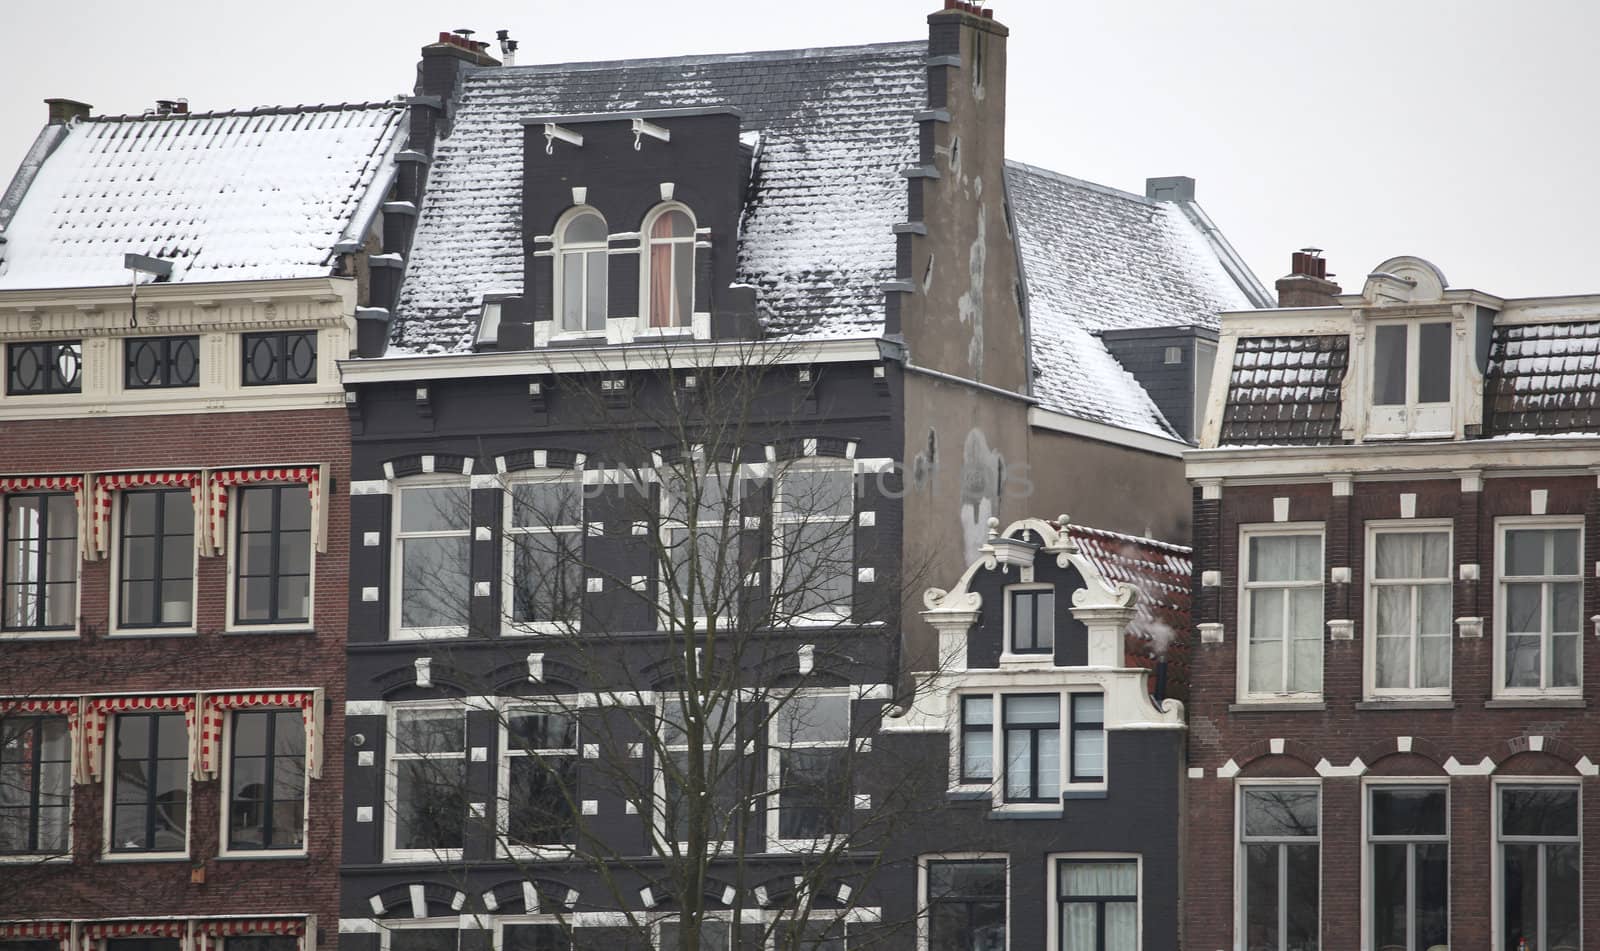 Amsterdam apartments in the winter snow.